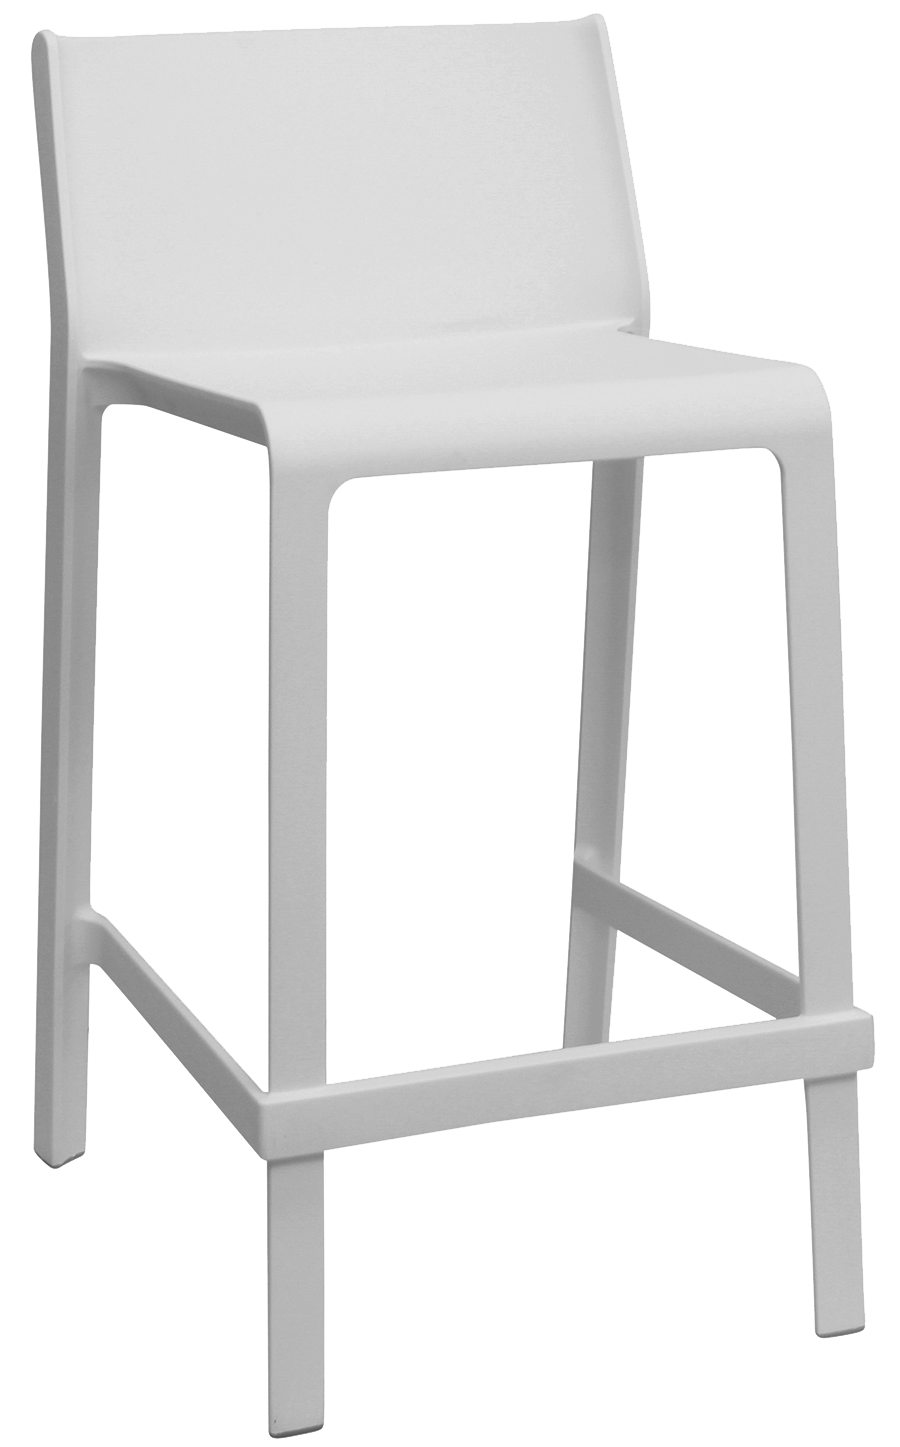 STOOL TRILL 650MM WHITE